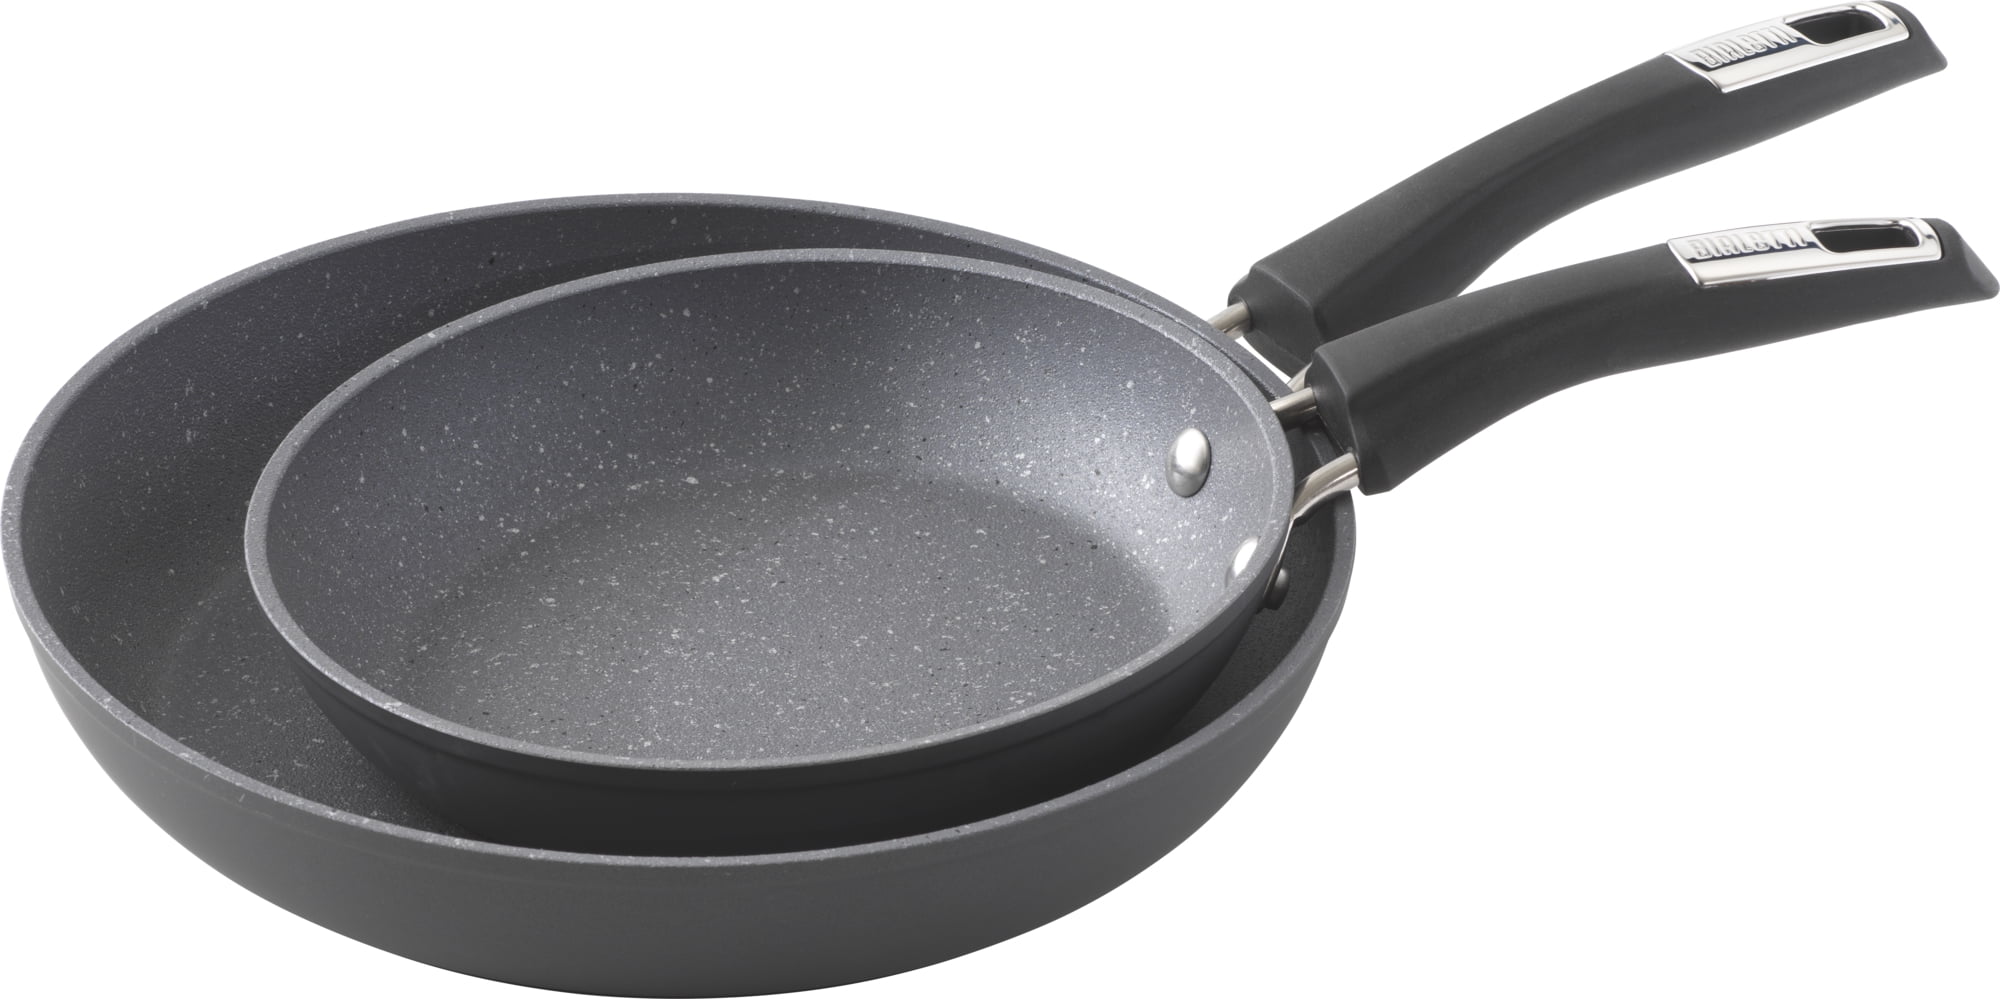 Bialetti Grill Pan - Black, 10.5 in - Fry's Food Stores